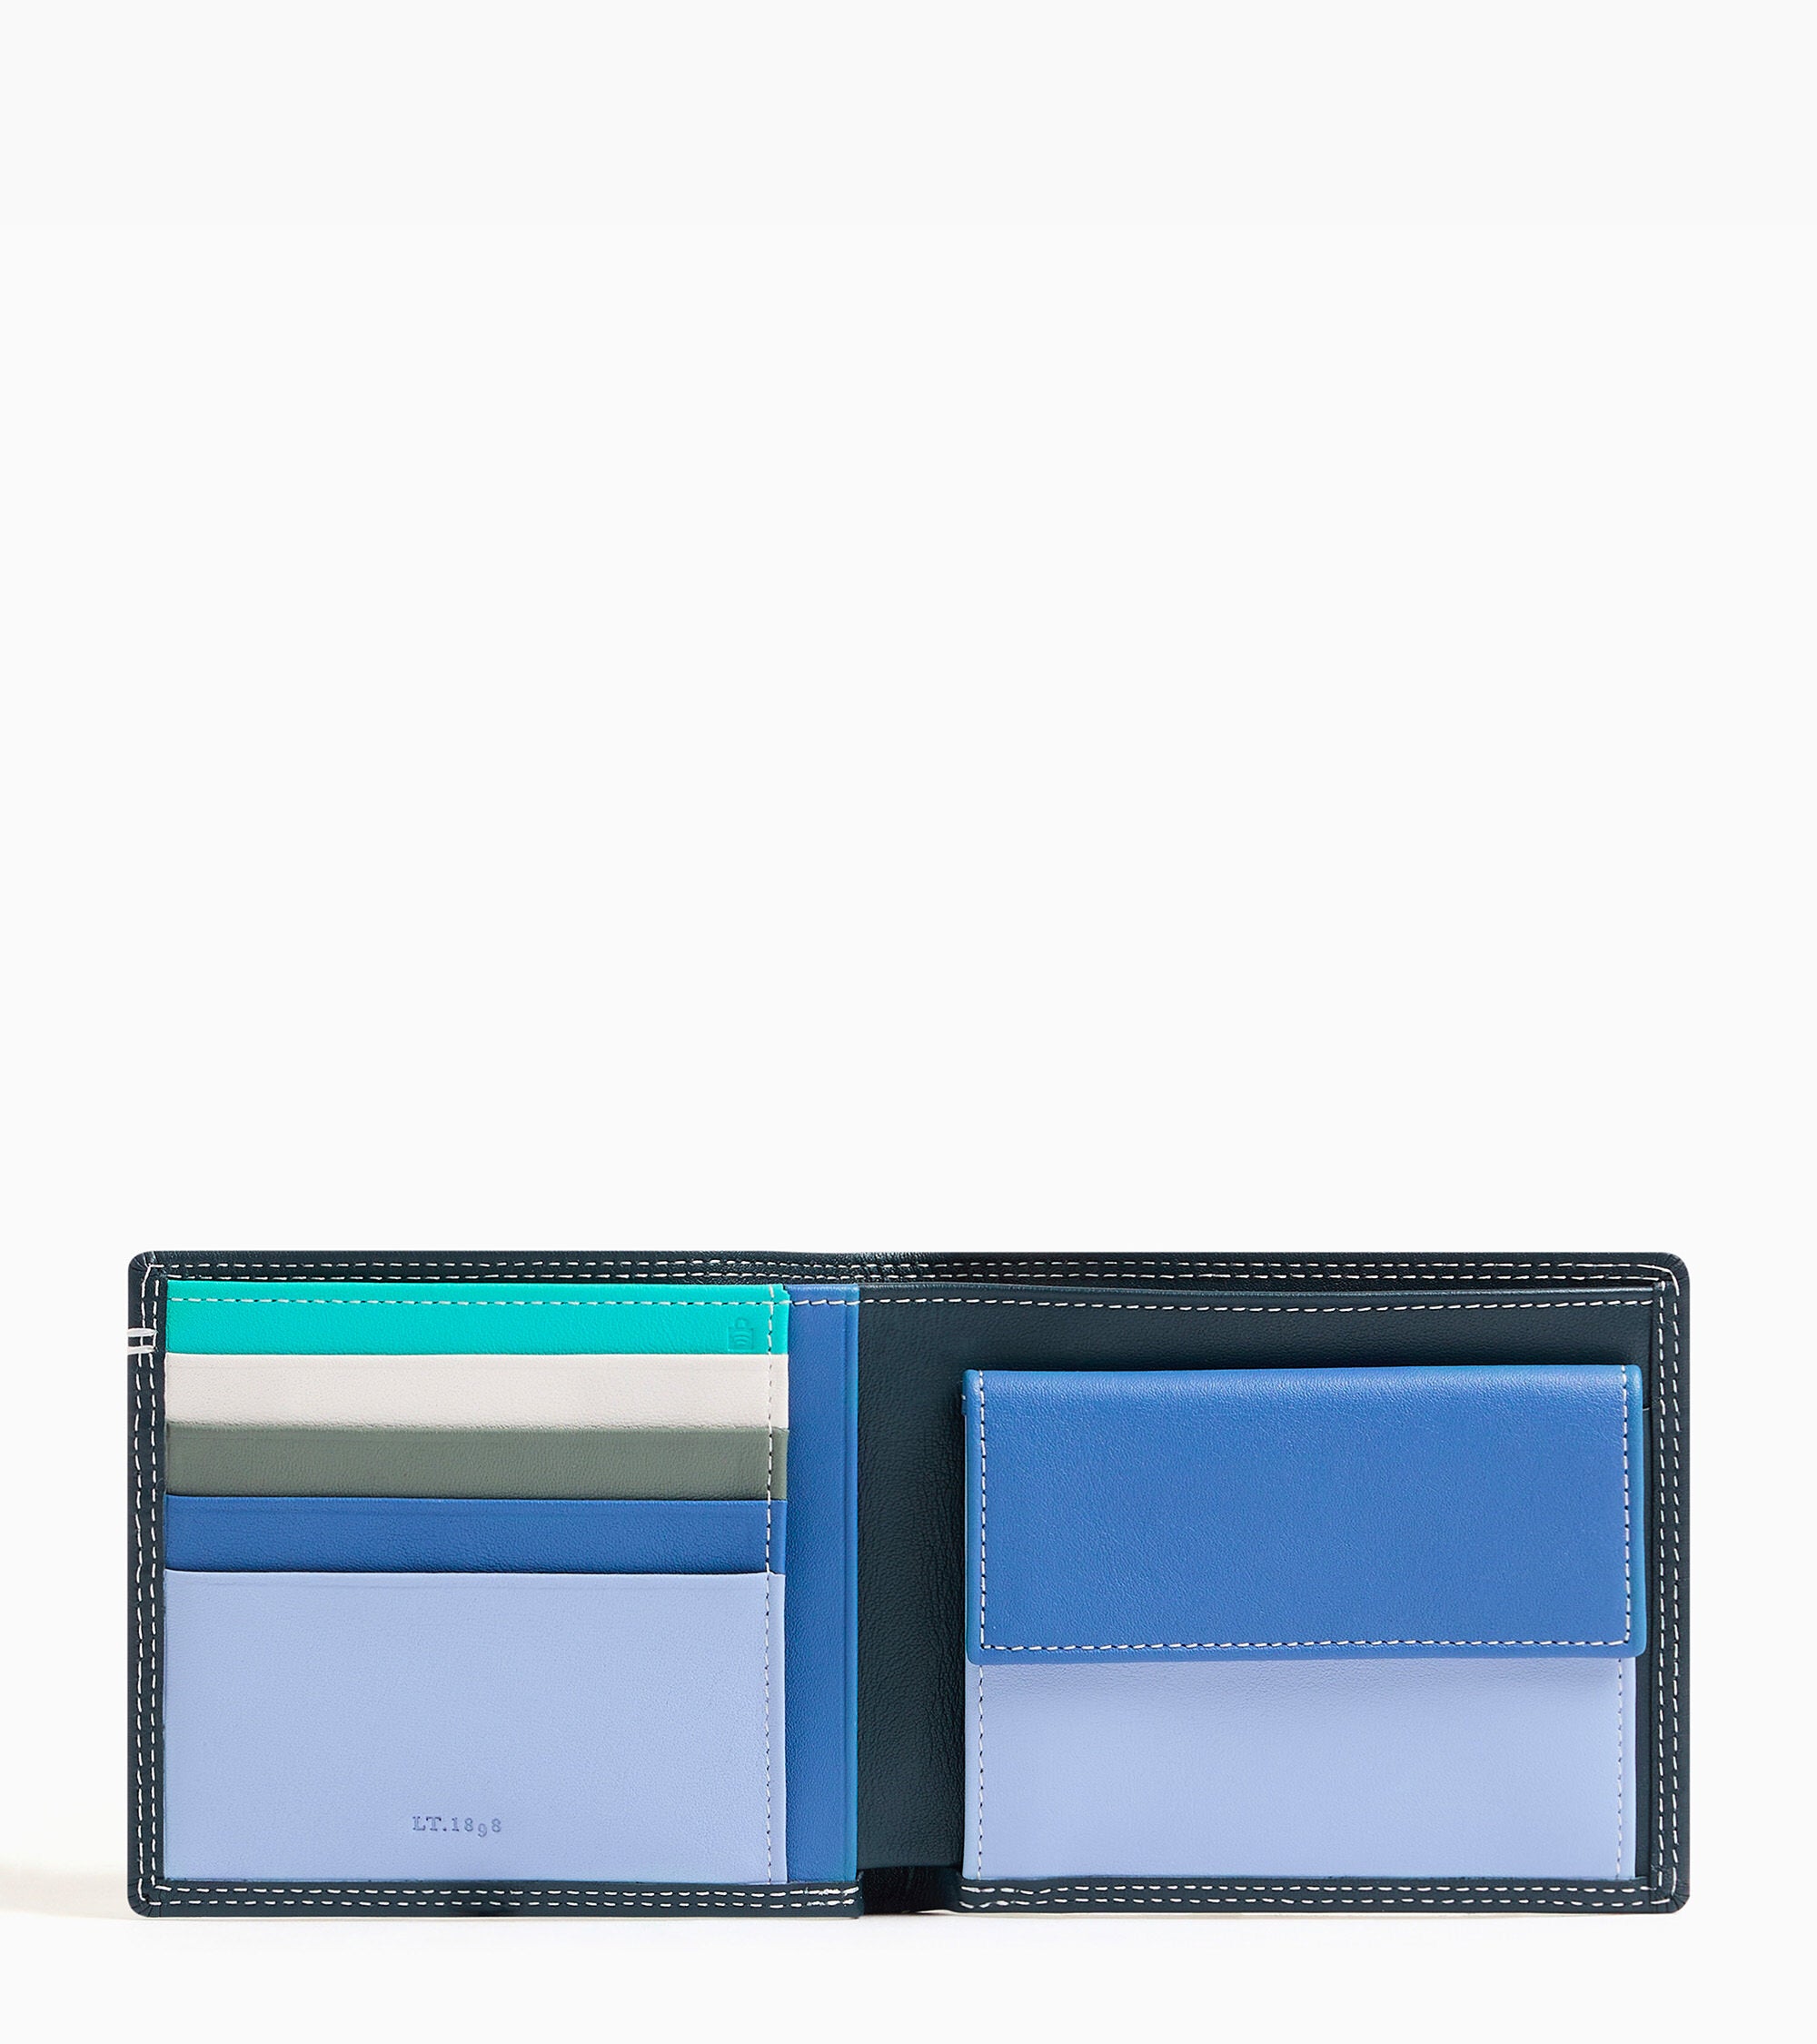 Martin smooth leather 2-fold flap wallet